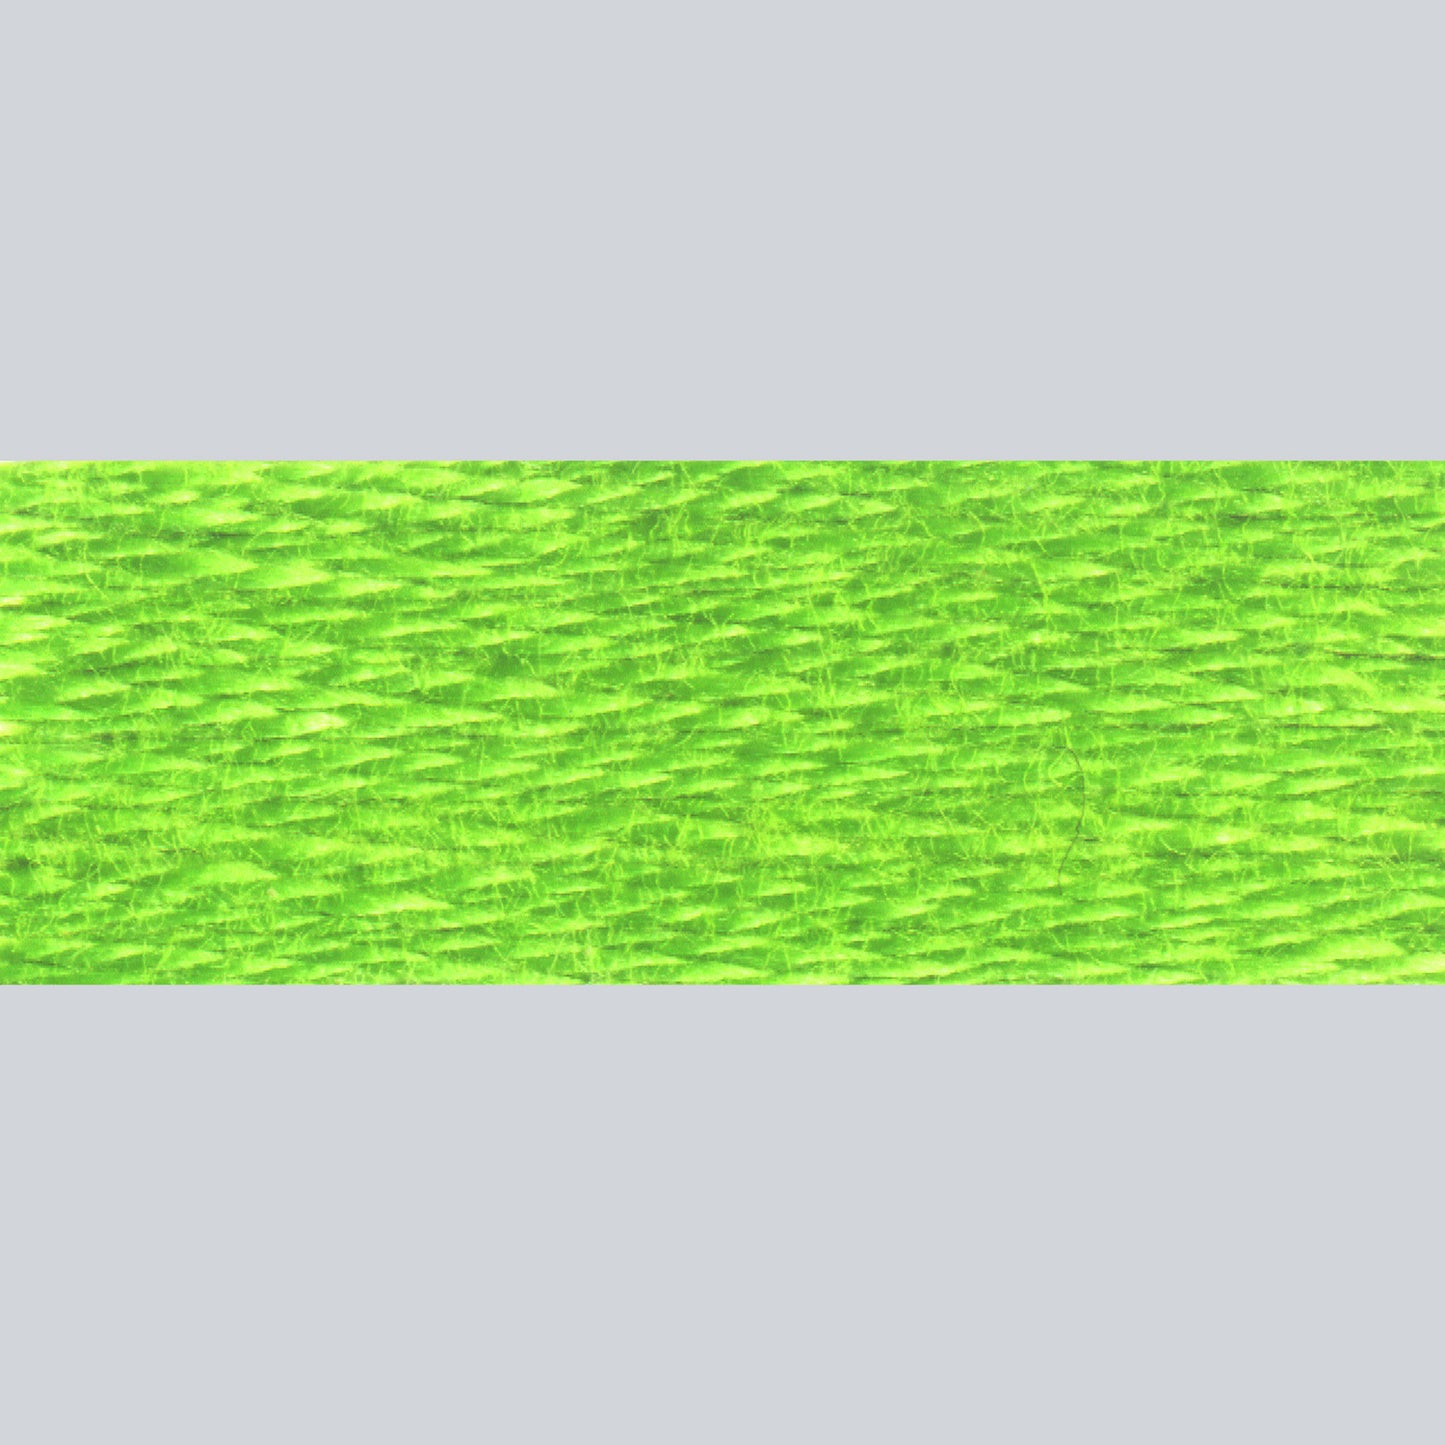 DMC Embroidery Floss - 704 Bright Chartreuse Alternative View #1